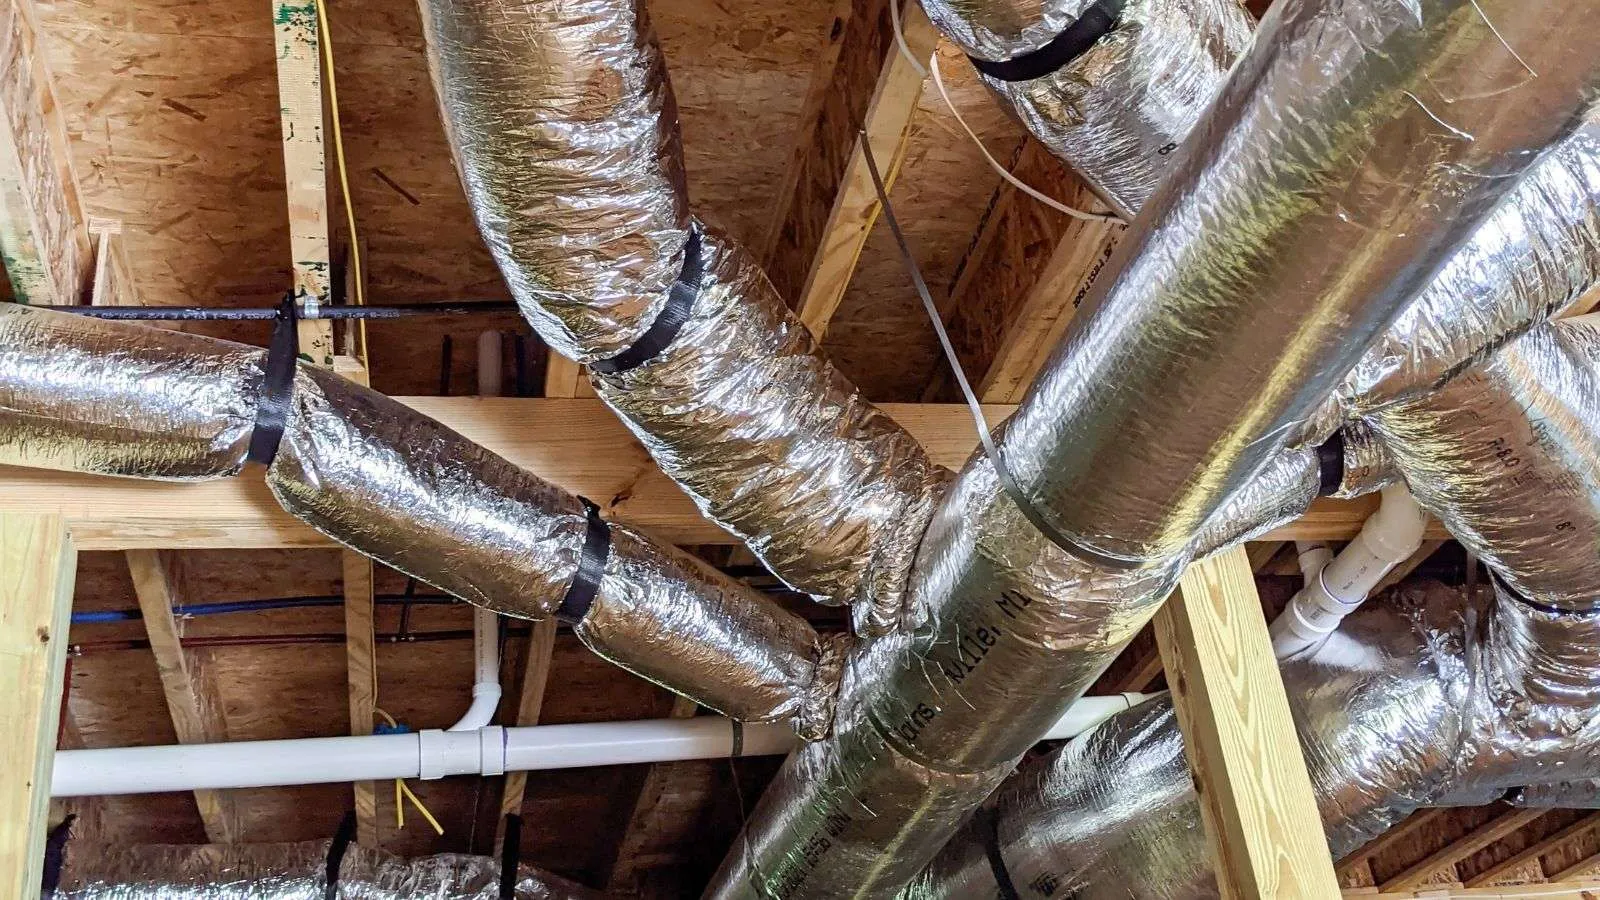 Duct work design - bighomeprojects.com